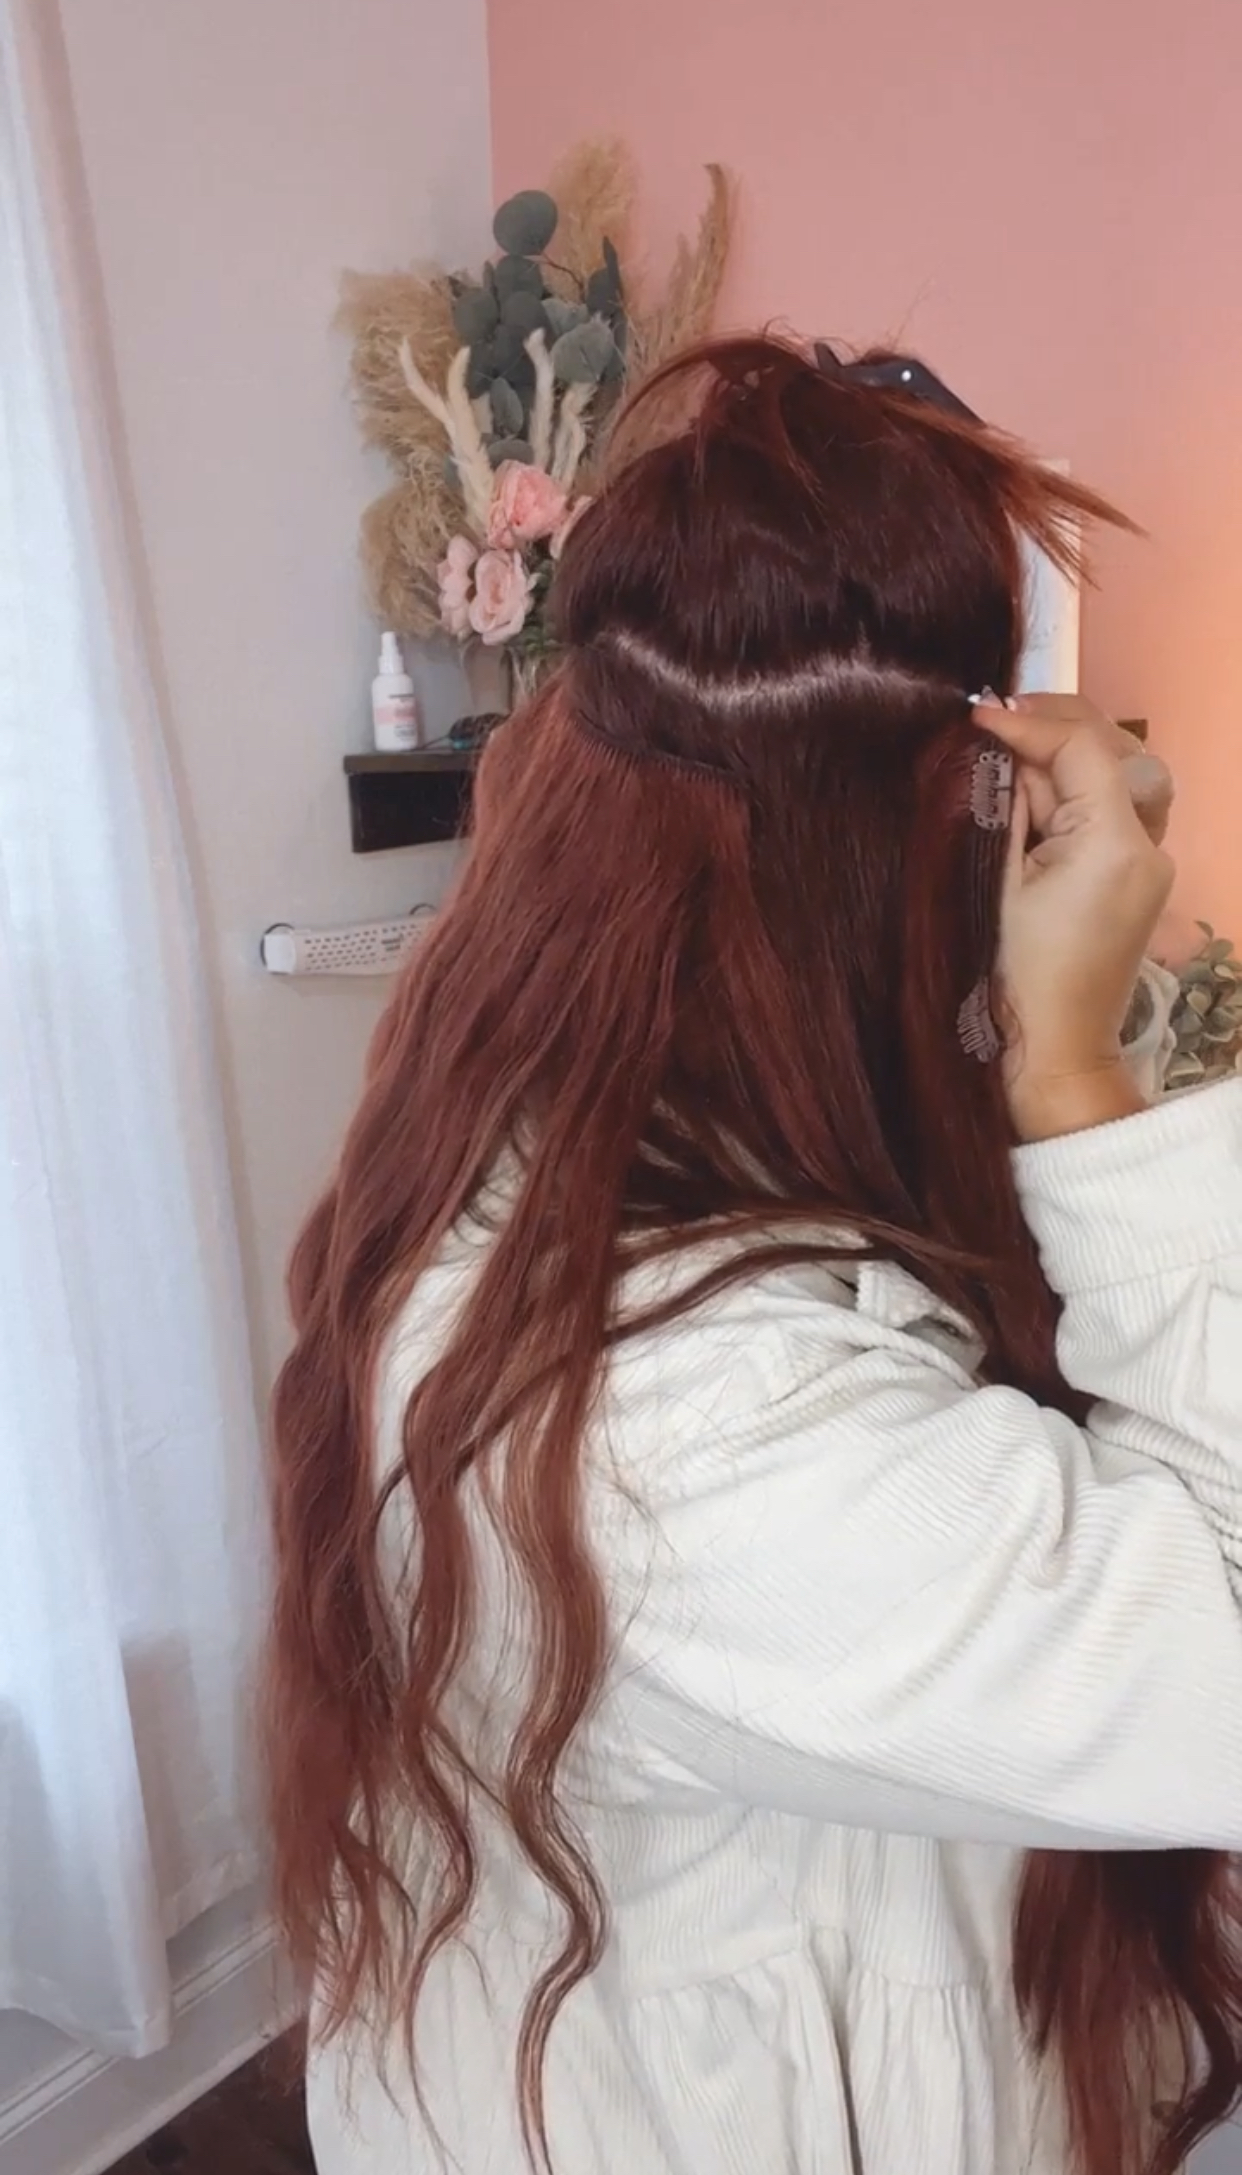 clipping in two tracks of Cashmere Hair extensions 